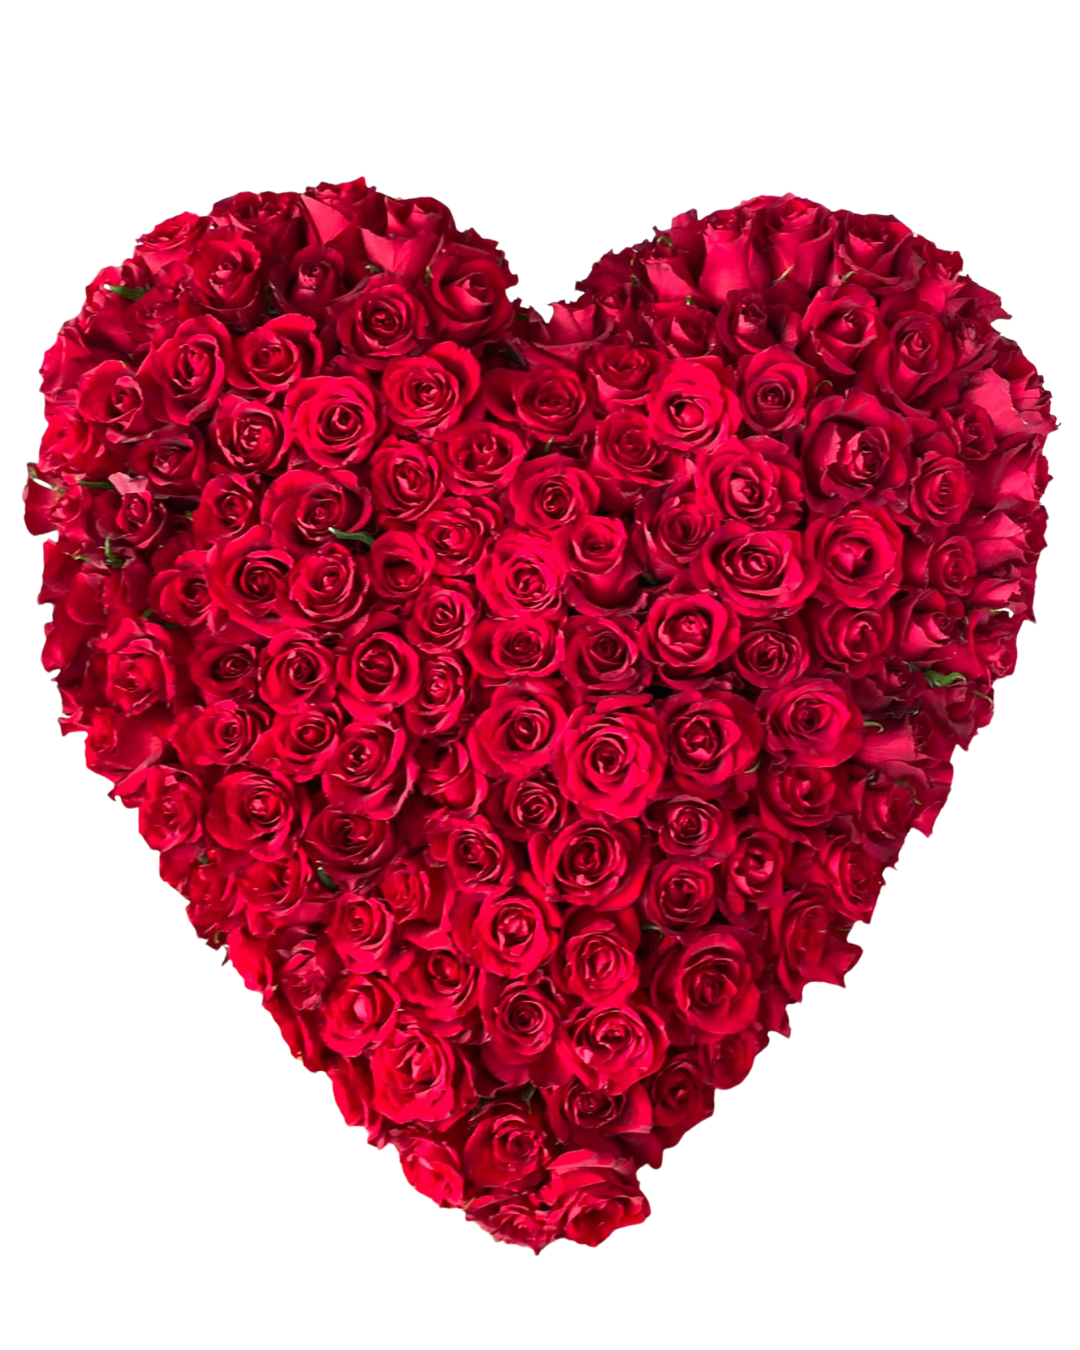 Heart of 200 Red Roses "Love"